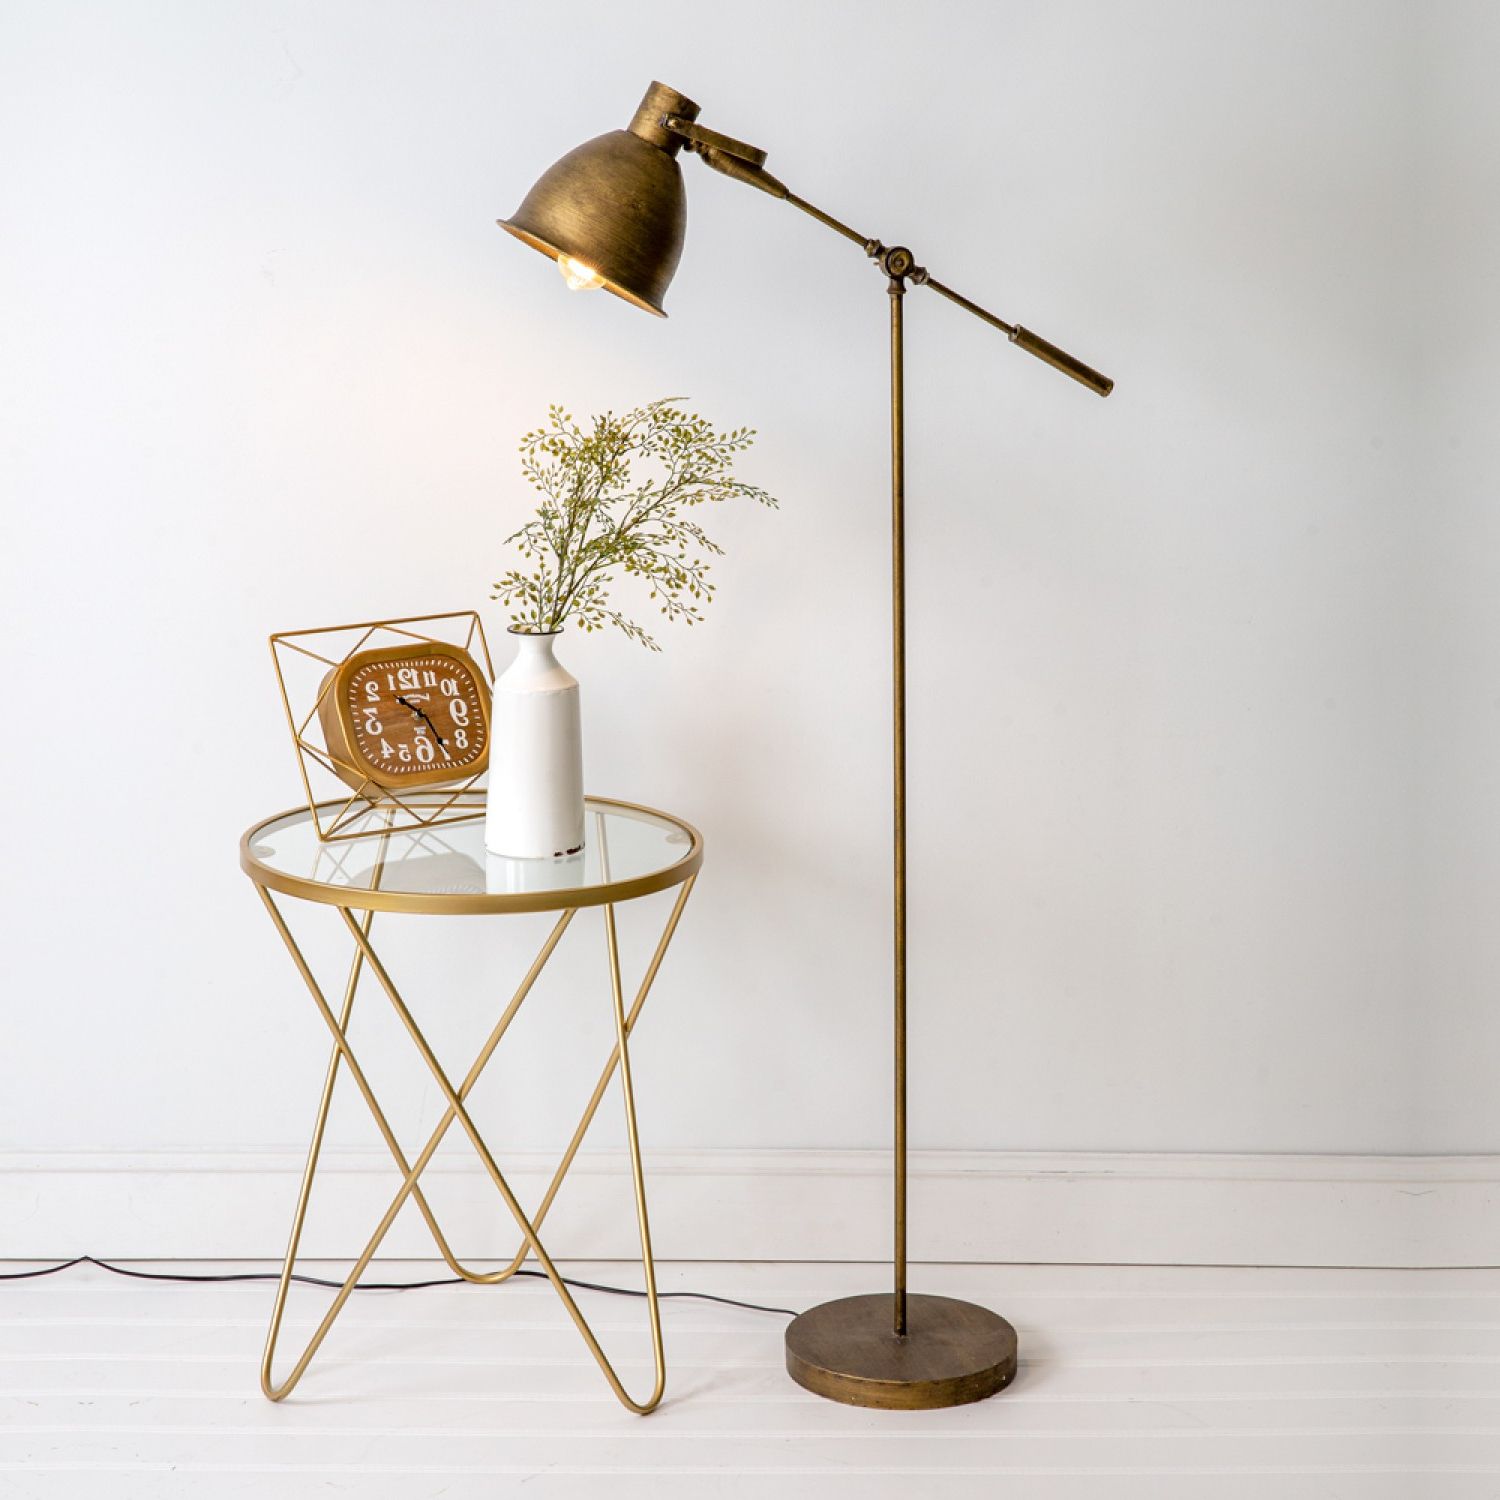 Preferred Vintage Farmhouse Antique Brass Floor Lamp Pertaining To Antique Brass Standing Lamps (View 3 of 15)